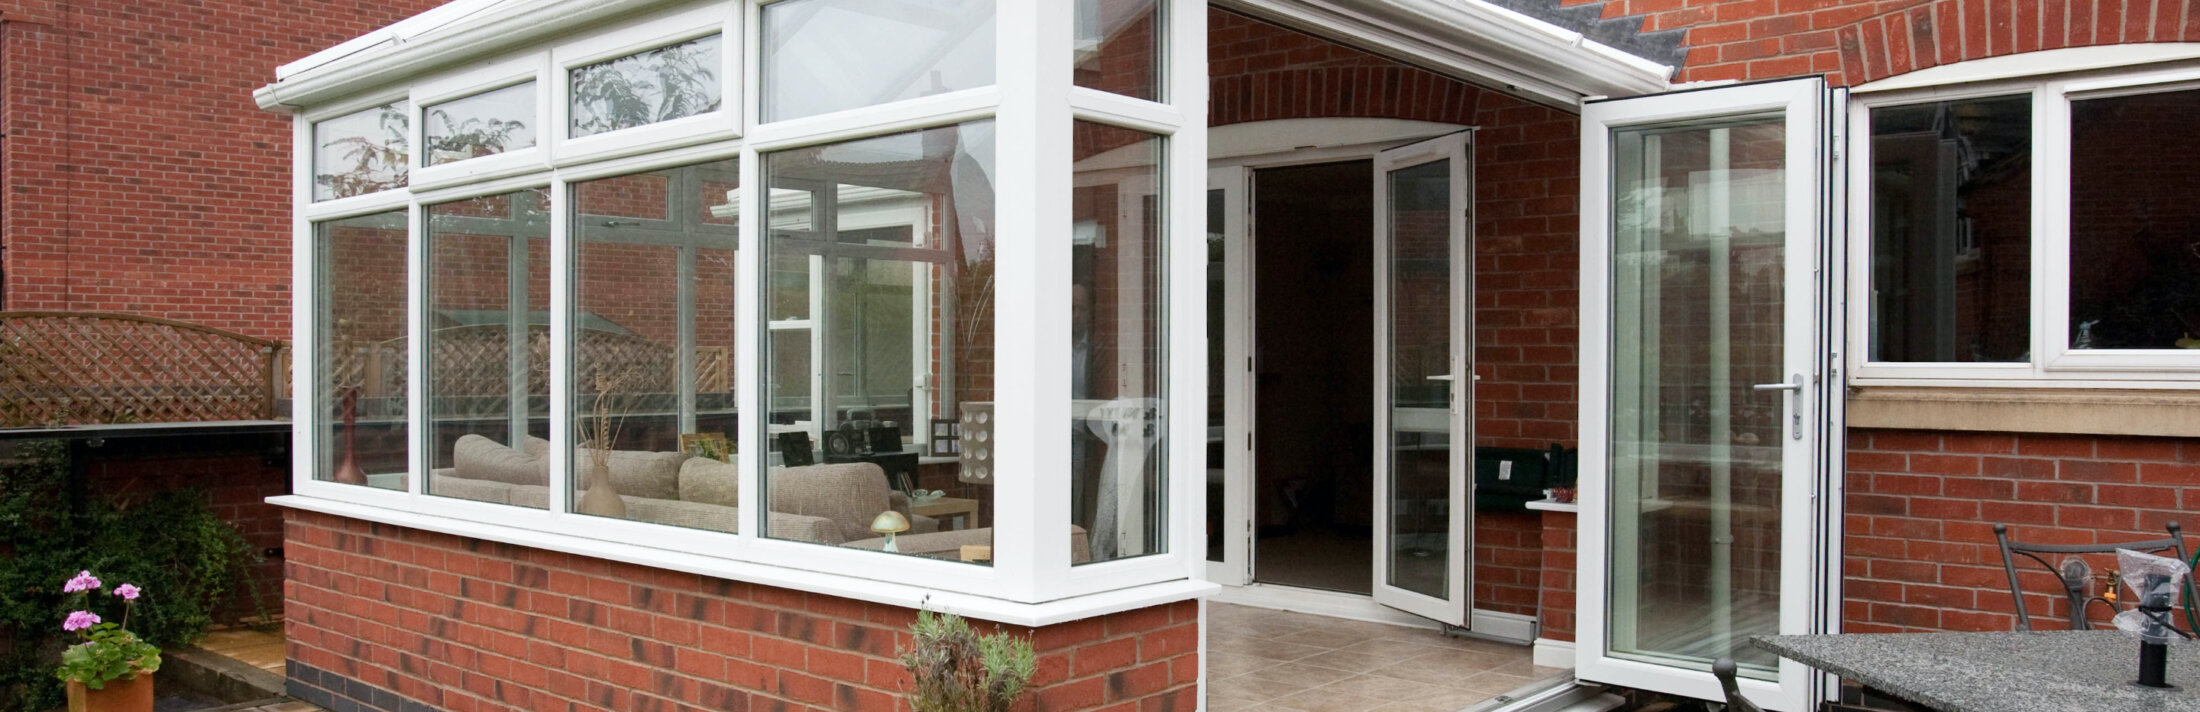 Evolve BiFold Victorian Conservatory Side On Doors Open copy@2x